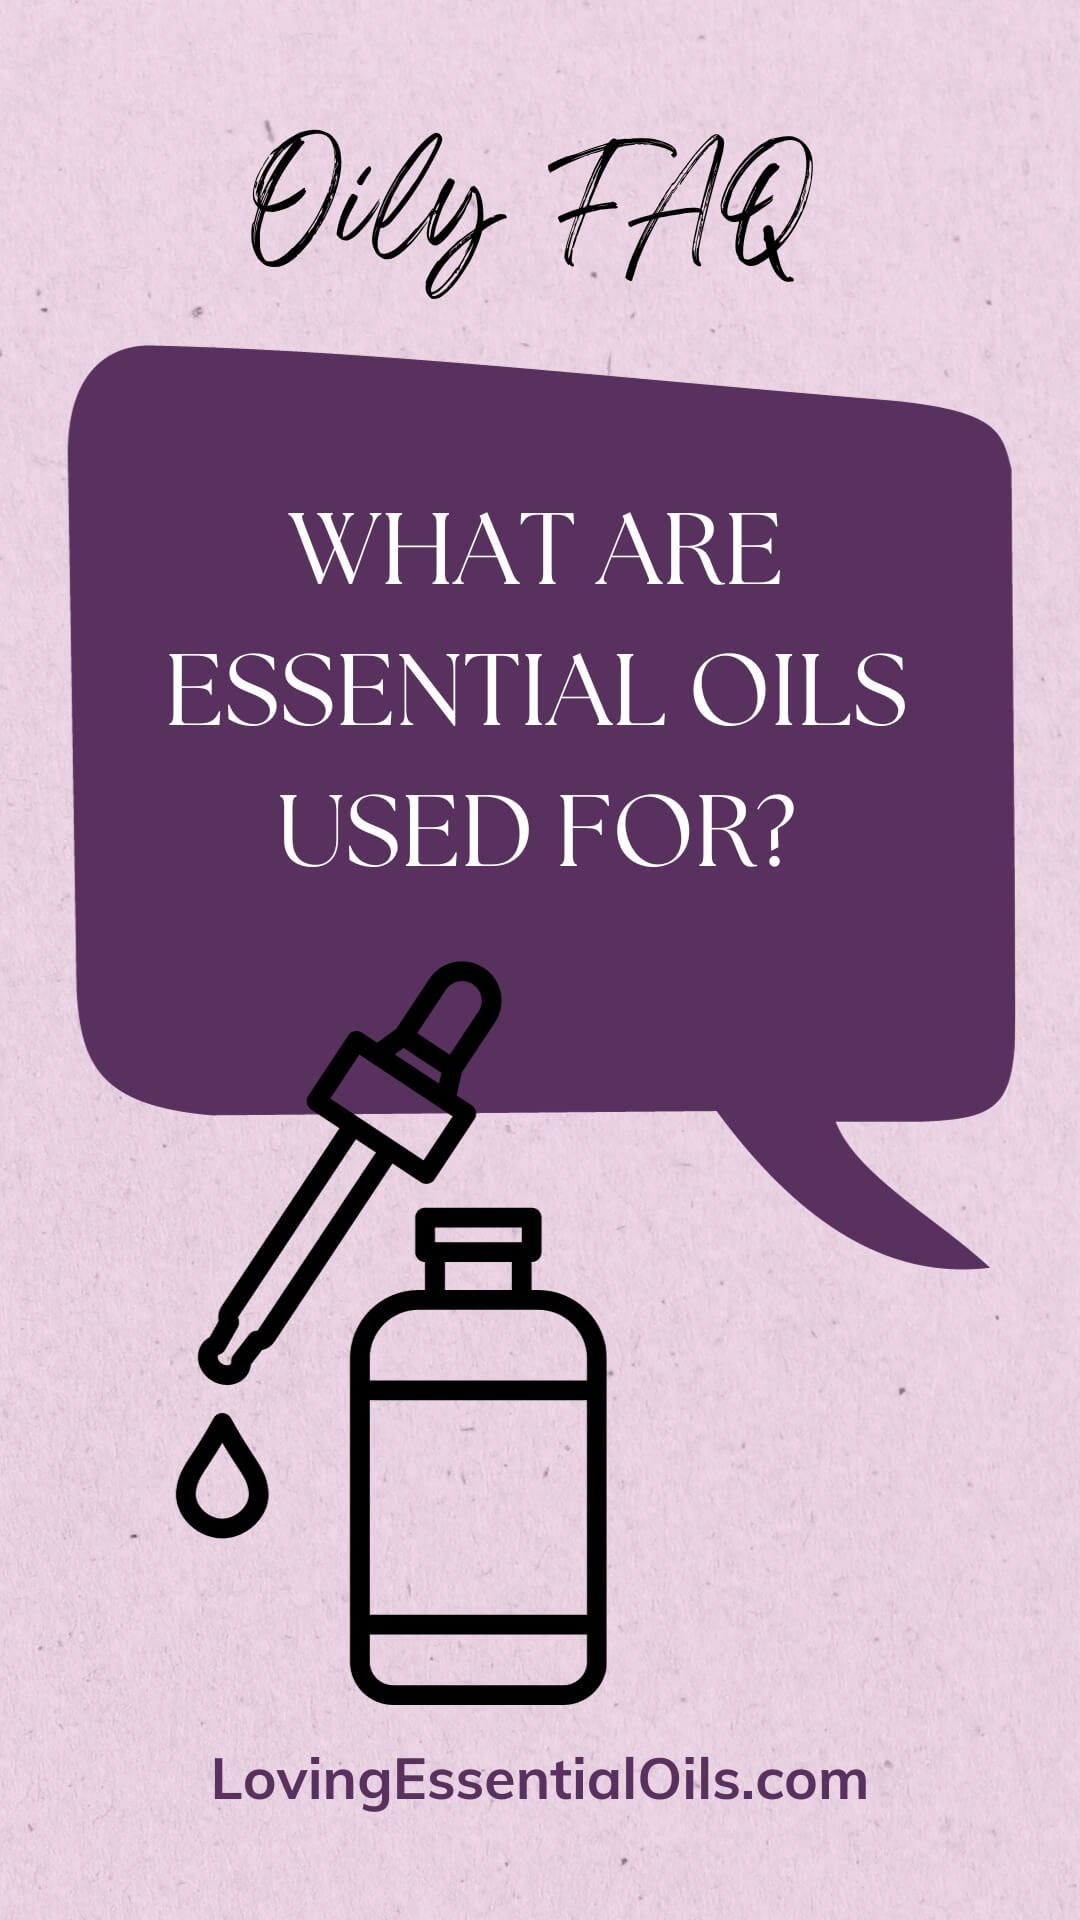 What Are Essential Oils Used For? by Loving Essential Oils